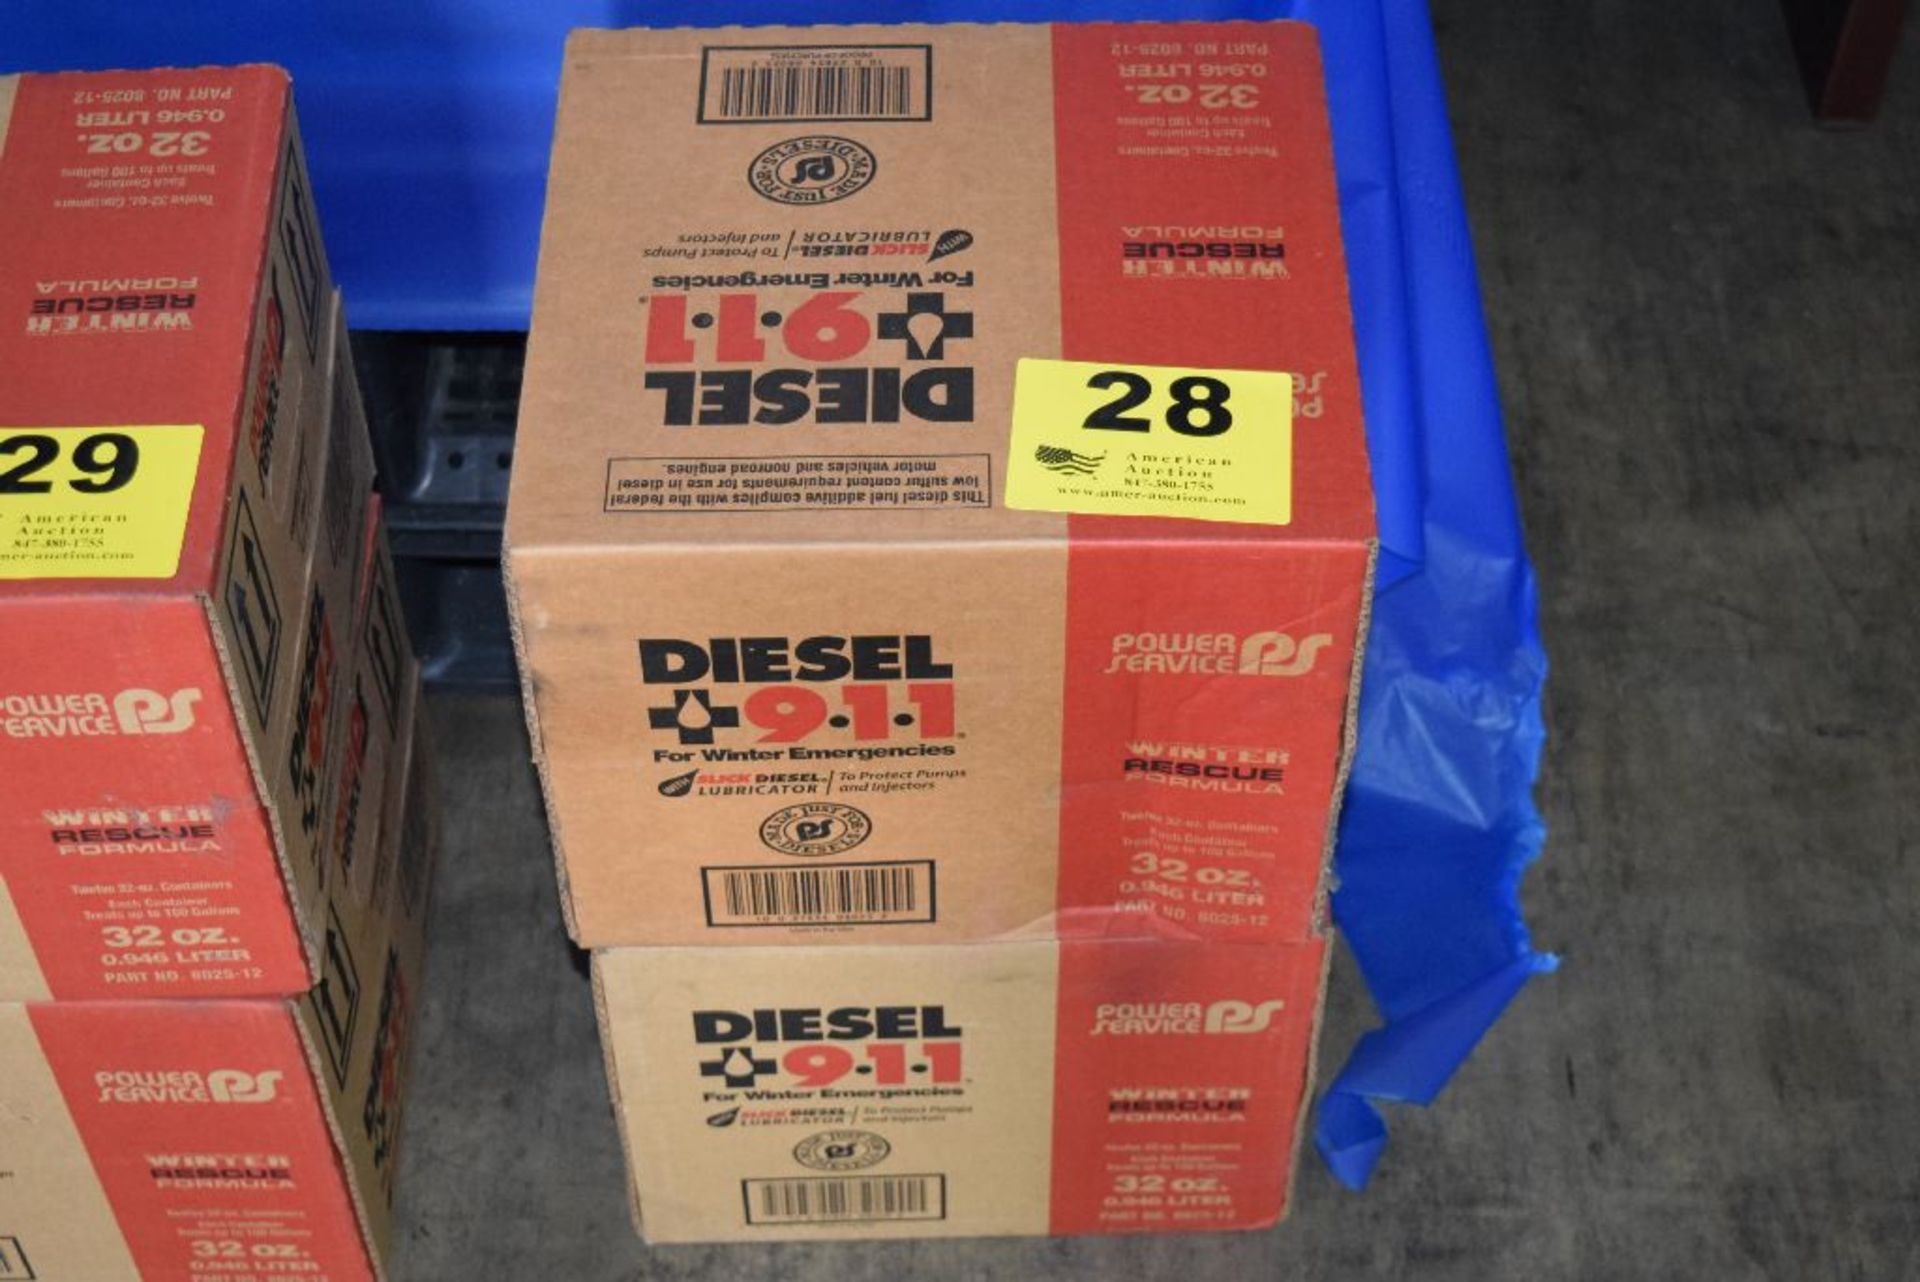 POWER SERVICE 32OZ. DIESEL WINTER RESCUE FORMULA IN TWO BOXES